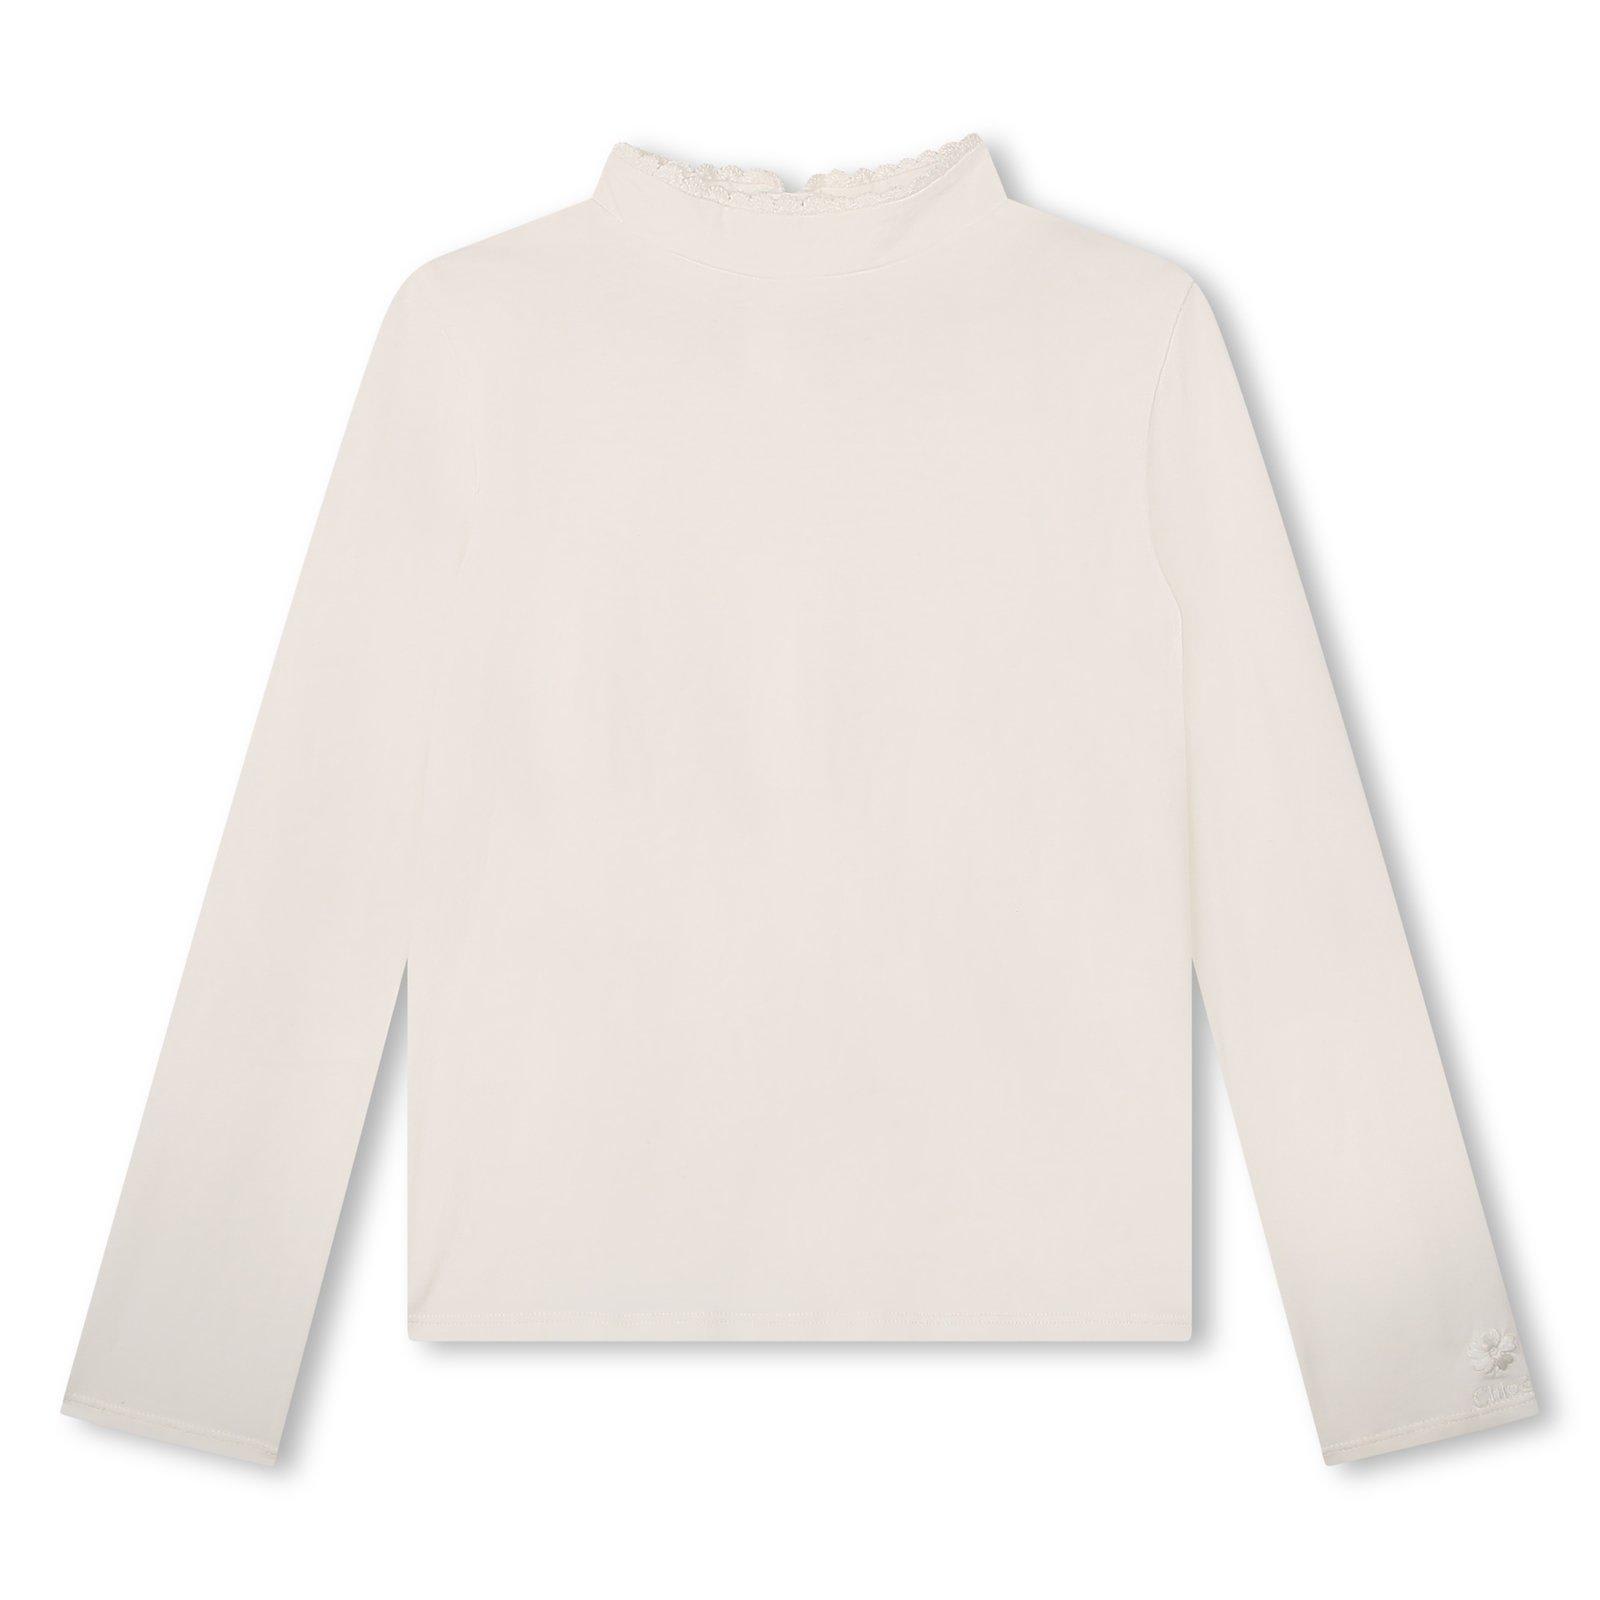 CHLOÉ LOGO EMBROIDERED RUFFLED BLOUSE